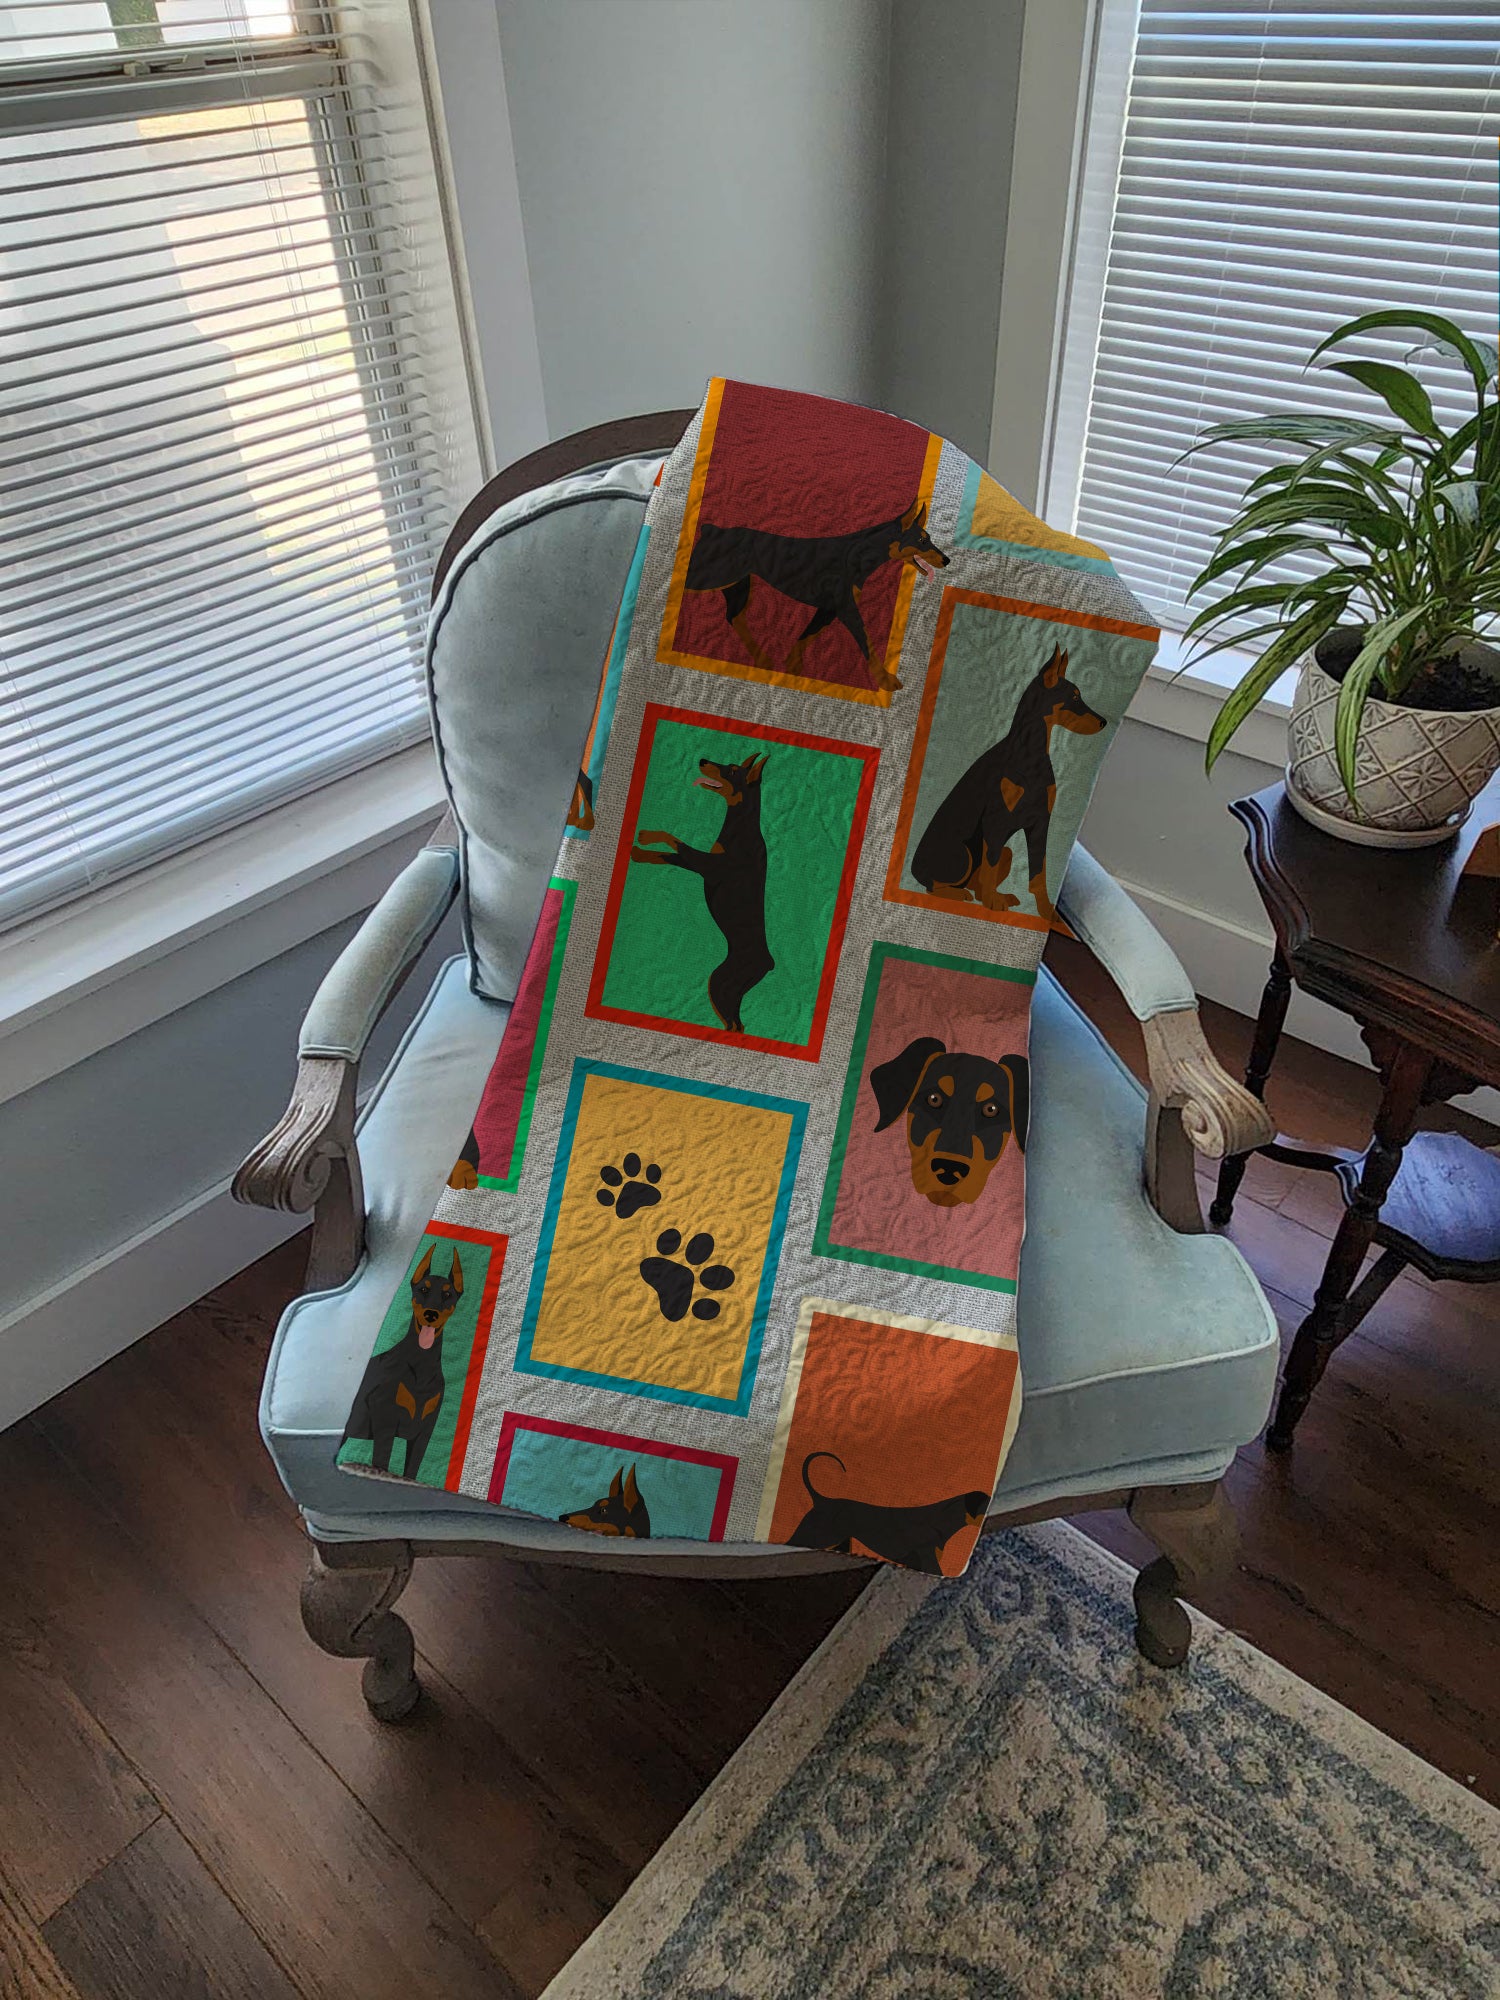 Lots of Doberman Pinscher Quilted Blanket 50x60 - the-store.com